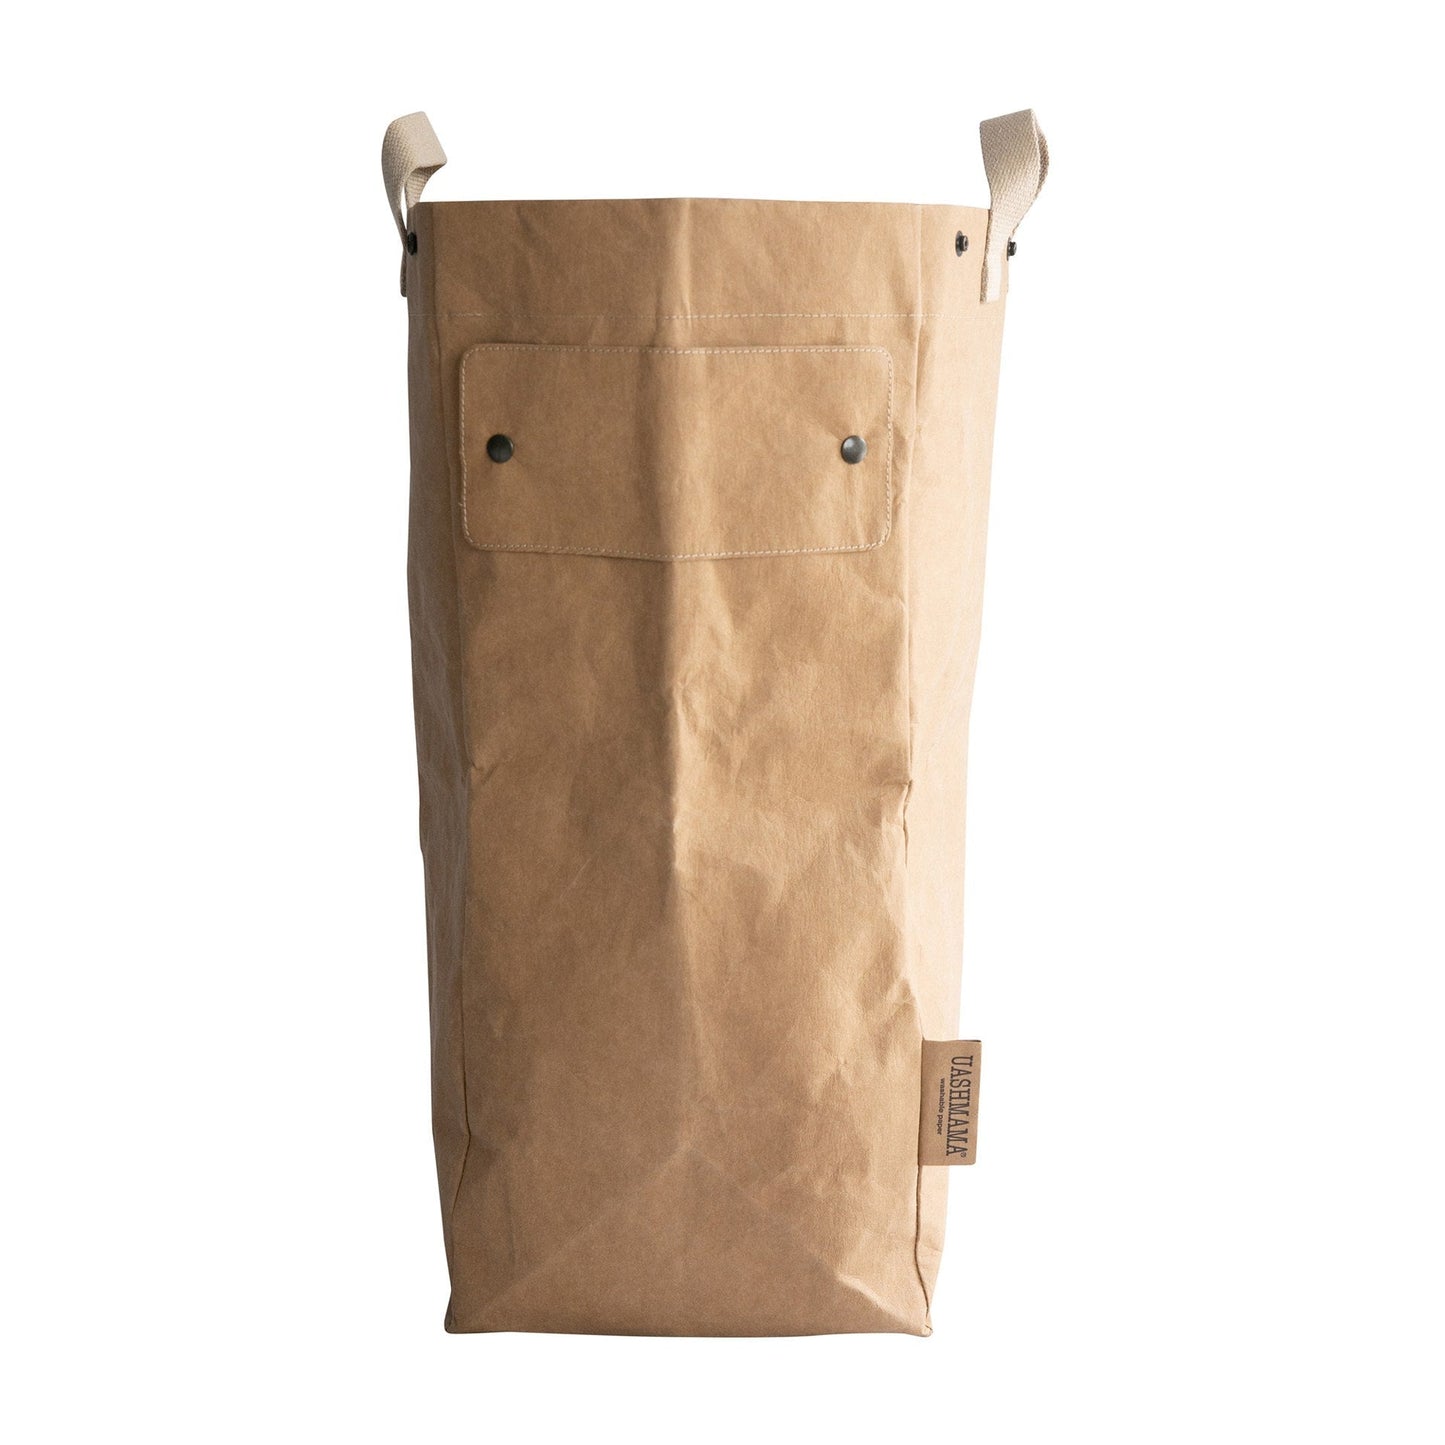 A tan coloured washable paper laundry bag is shown from the side, with two top handles and a UASHMAMA logo tab at the bottom right.